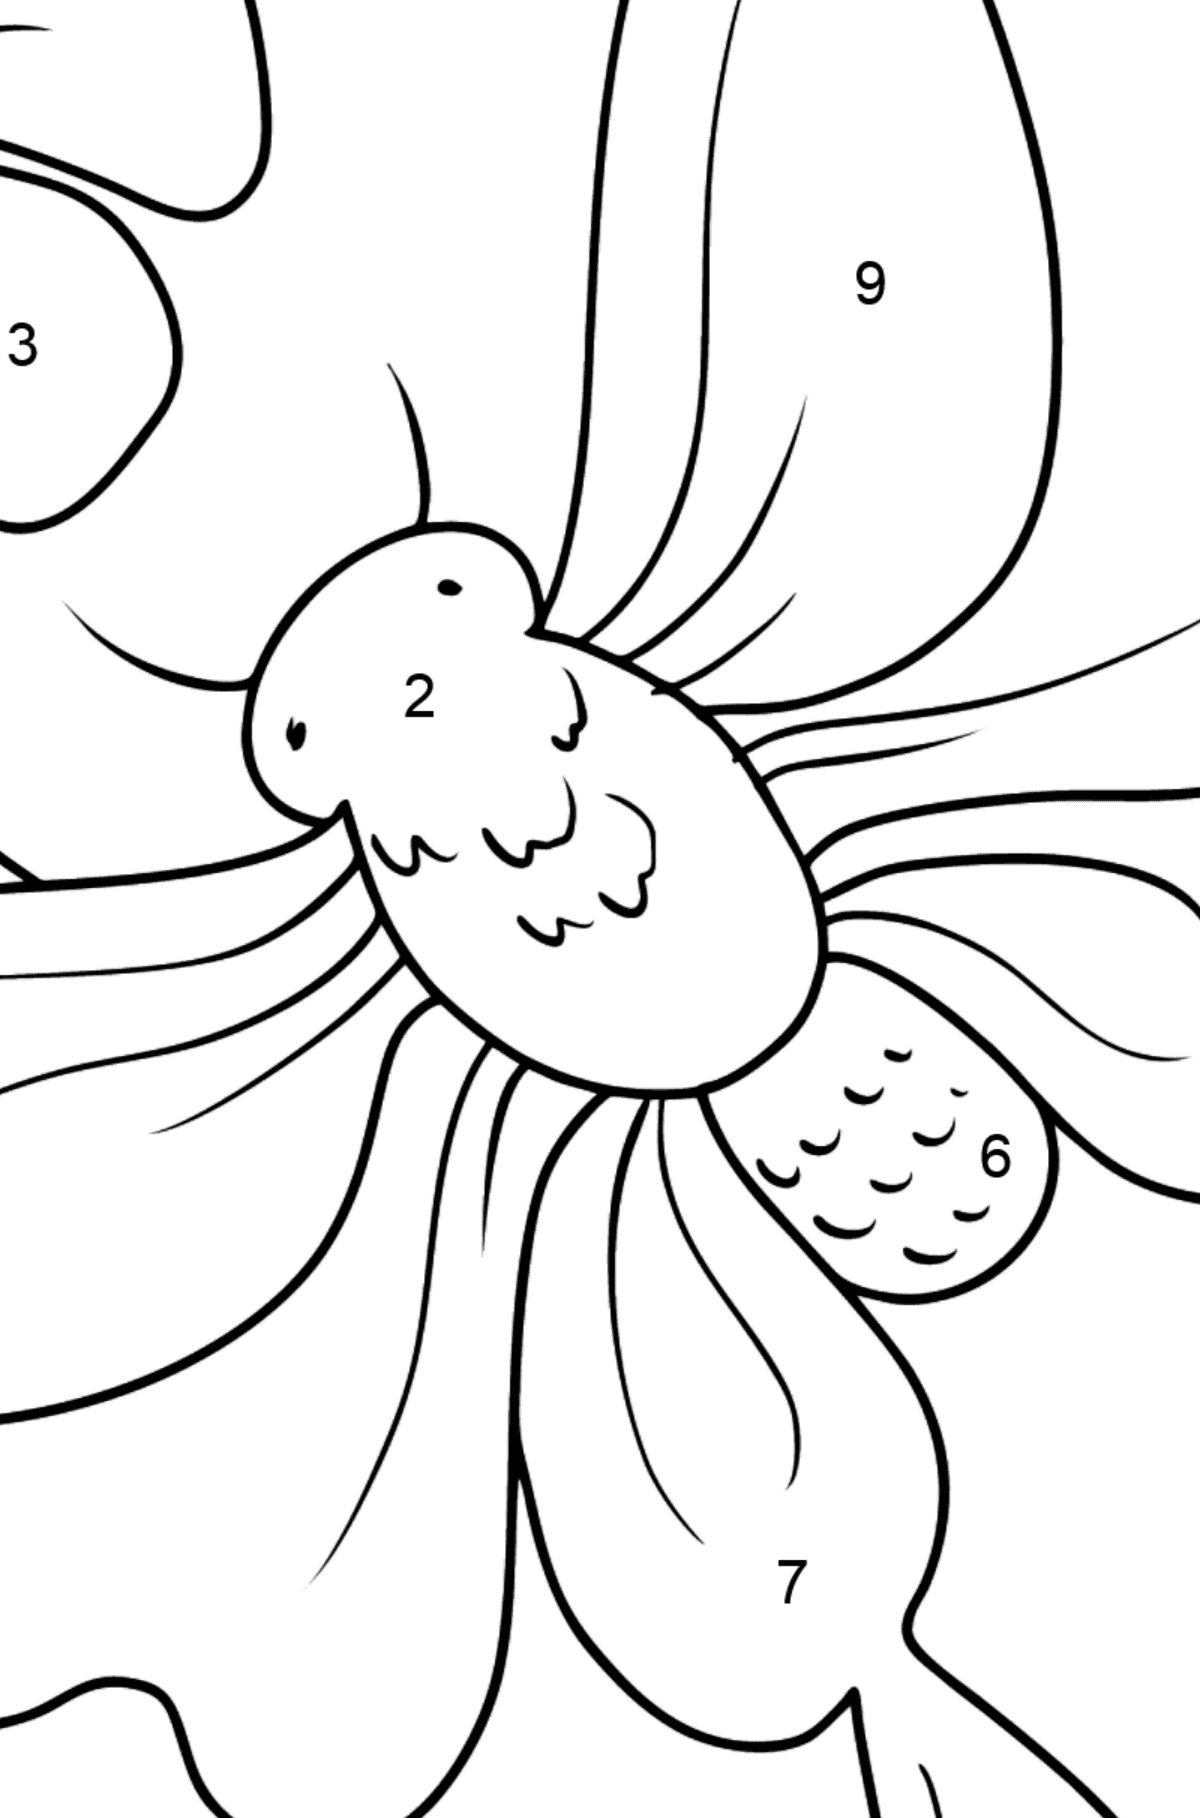 Butterfly on a Flower coloring page - Coloring by Numbers for Kids